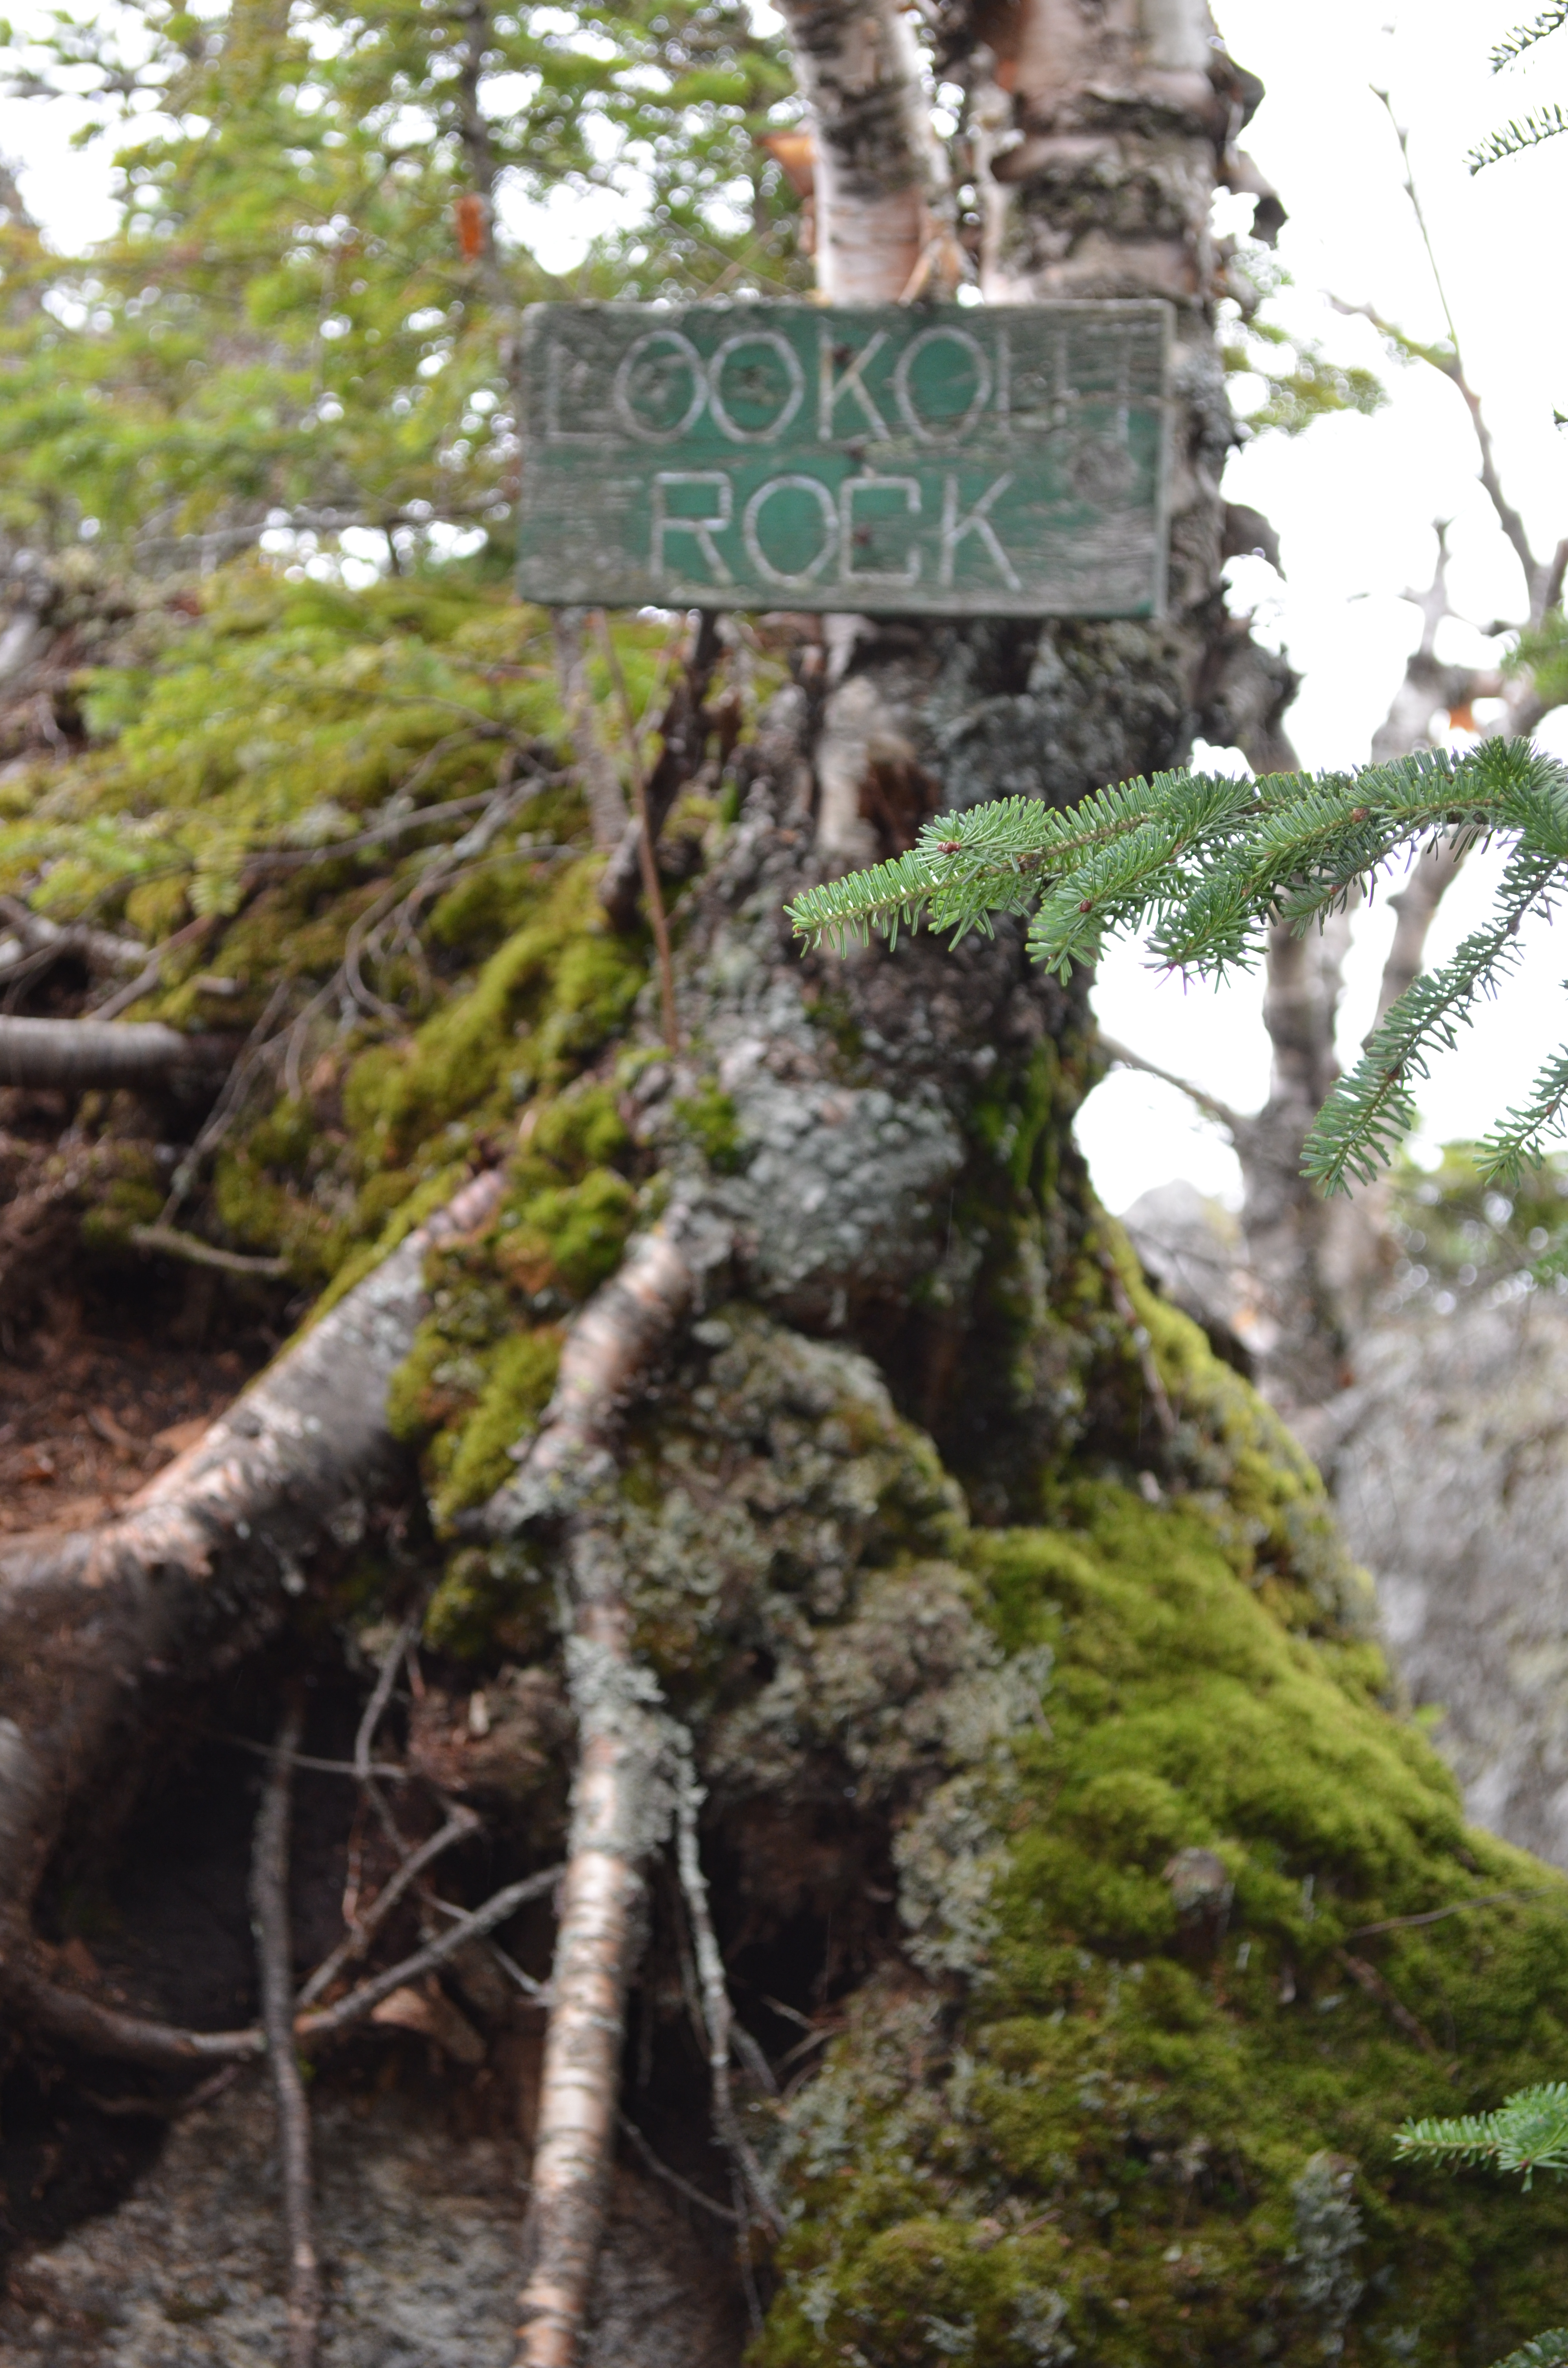 sign marking Lookout Rock